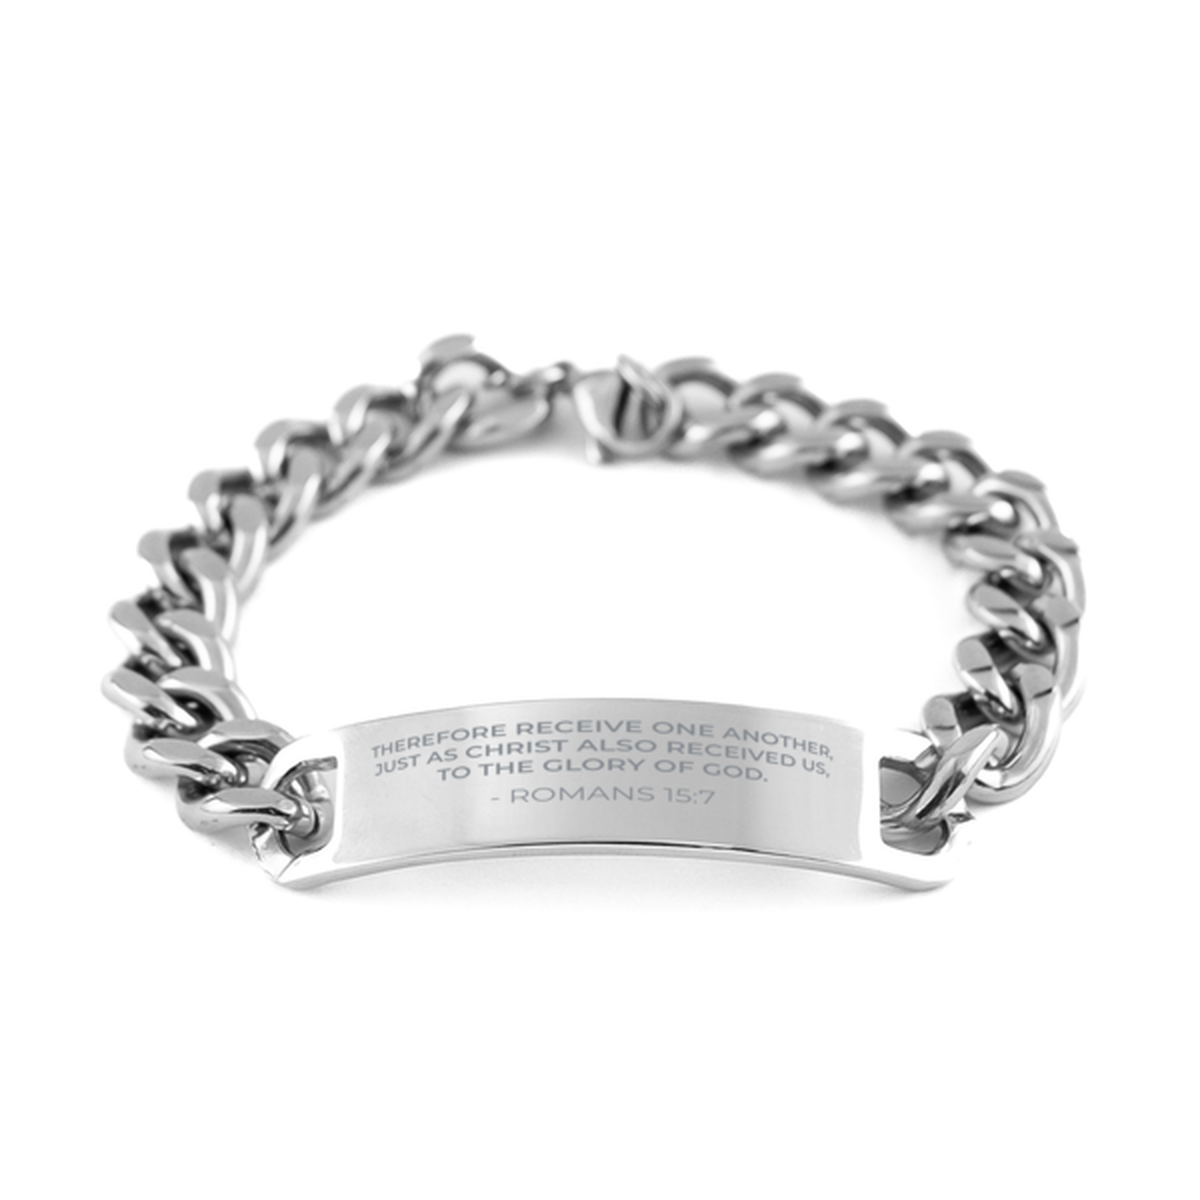 Bible Verse Chain Stainless Steel Bracelet, Romans 15:7 Therefore Receive One Another, Just As Christ, Inspirational Christian Gifts For Men Women